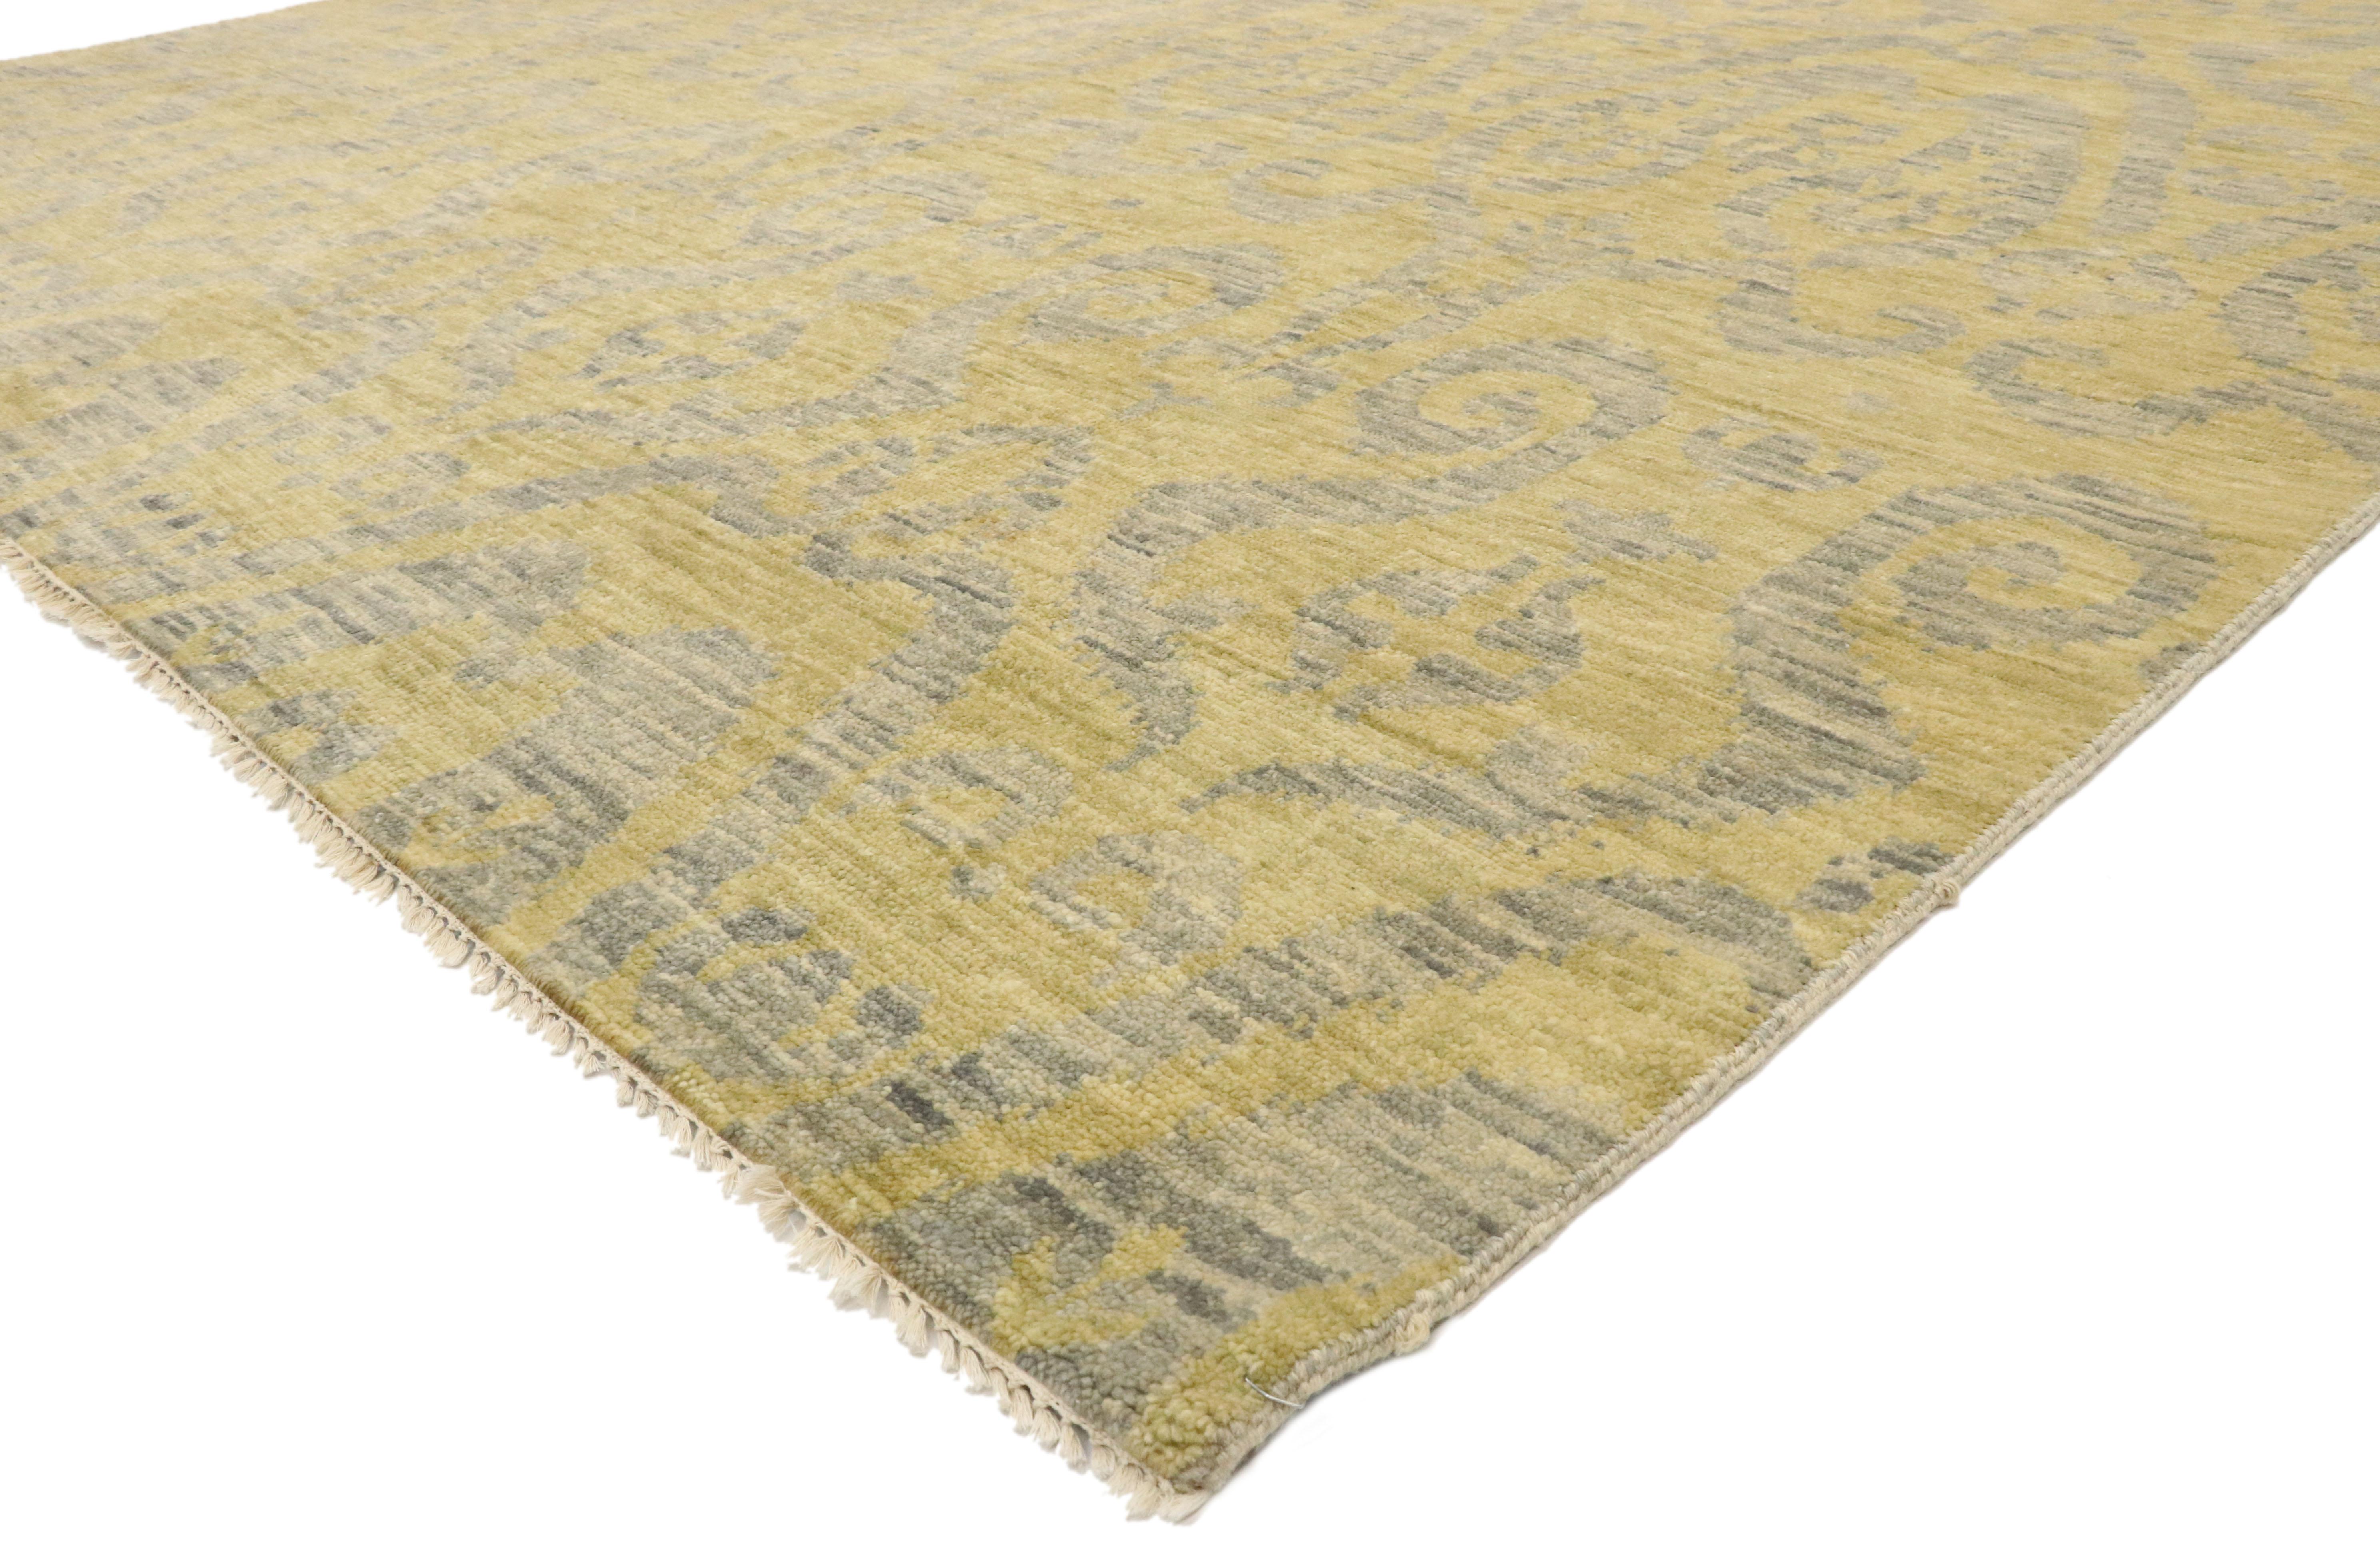 30084 new transitional Ikat Area rug with modern design, contemporary Neutral Area rug. Warm and inviting, this hand knotted wool transitional ikat area rug beautifully embodies a modern contemporary style in neutral colors. The exquisite all-over